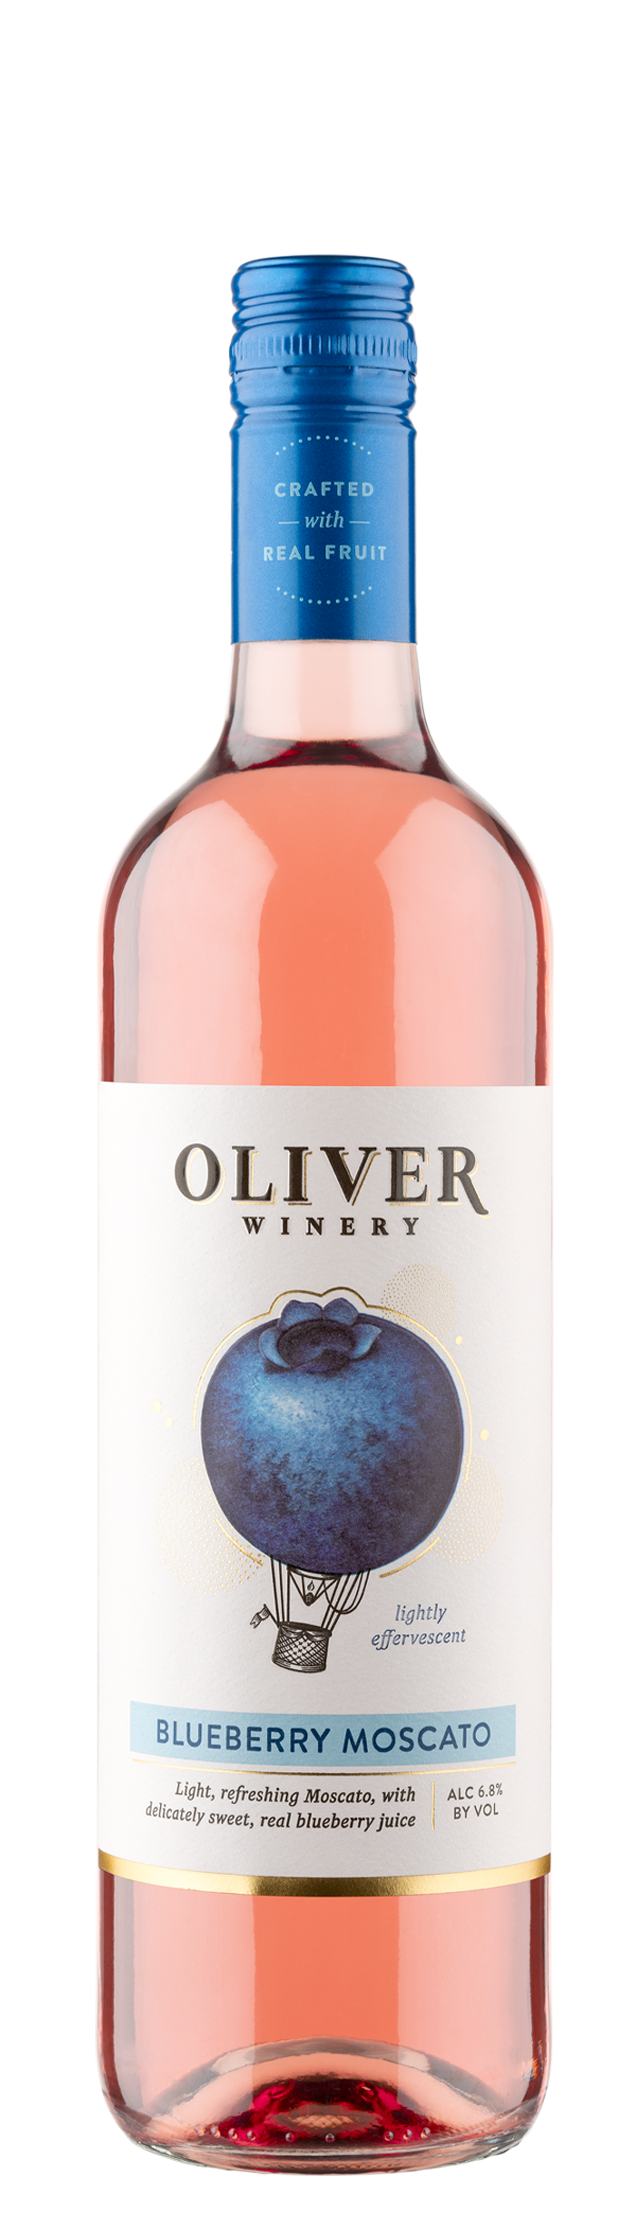 Oliver Winery Vine Series Blueberry Moscato Wine